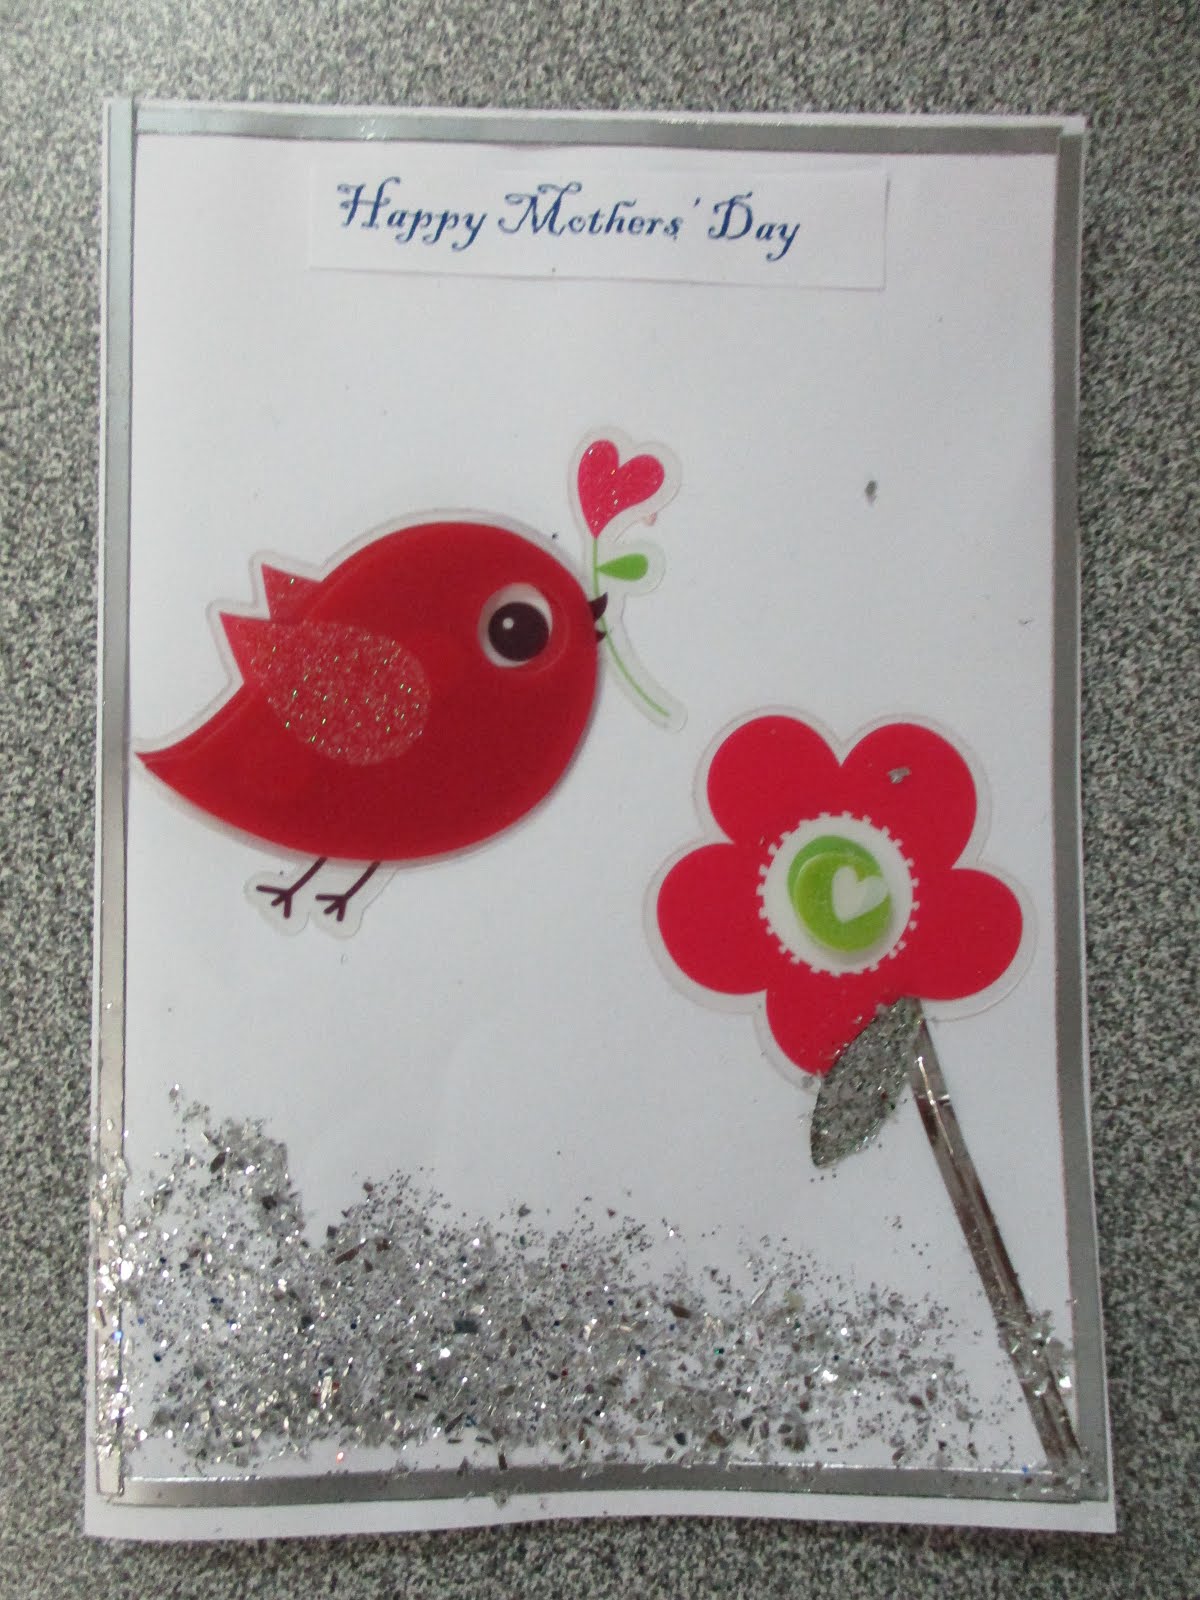 I enjoyed making my Mother's Day card.